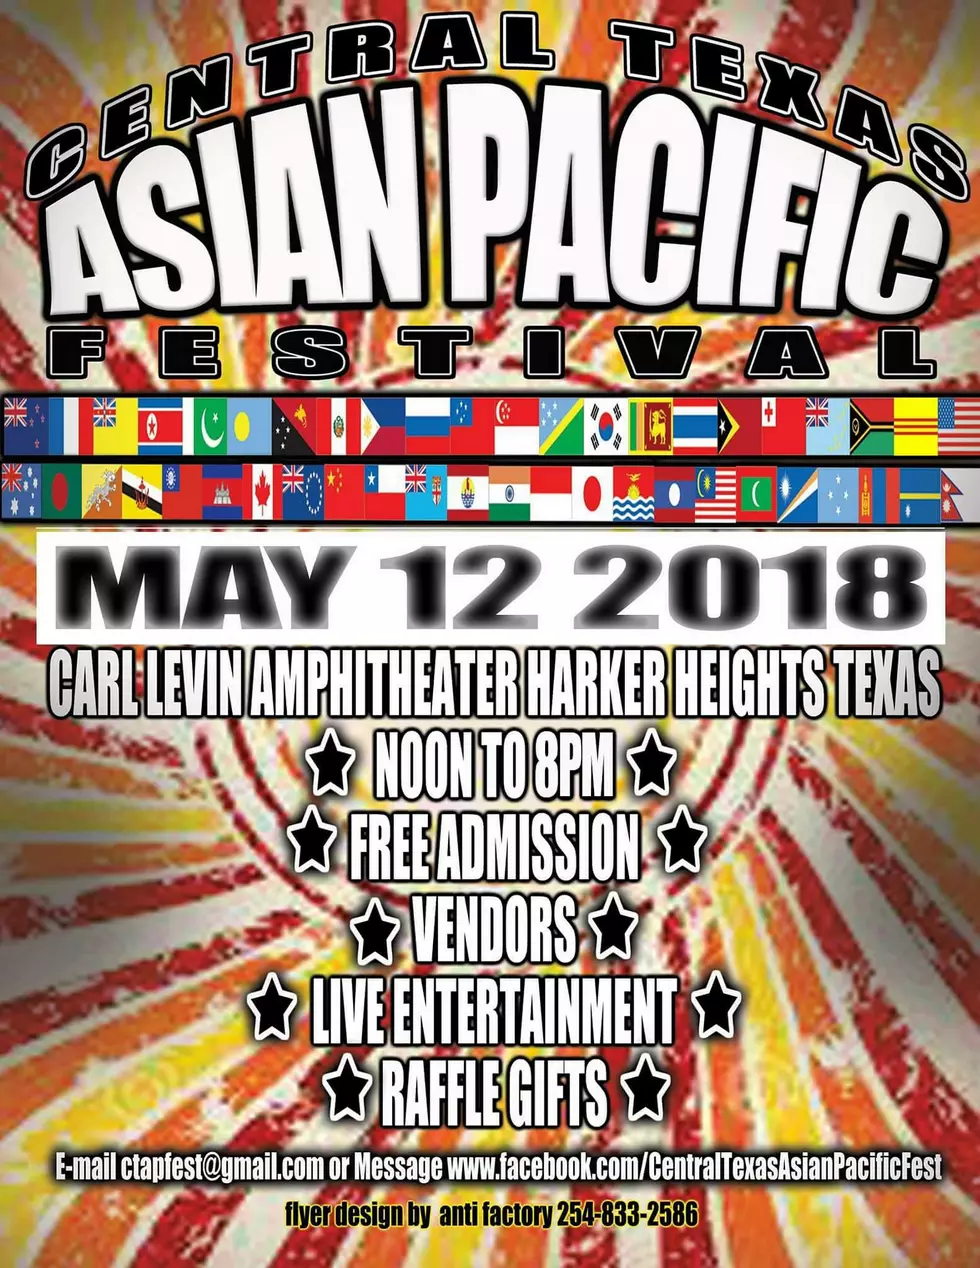 The Second Annual Centex Asian Pacific Festival In Harker Heights